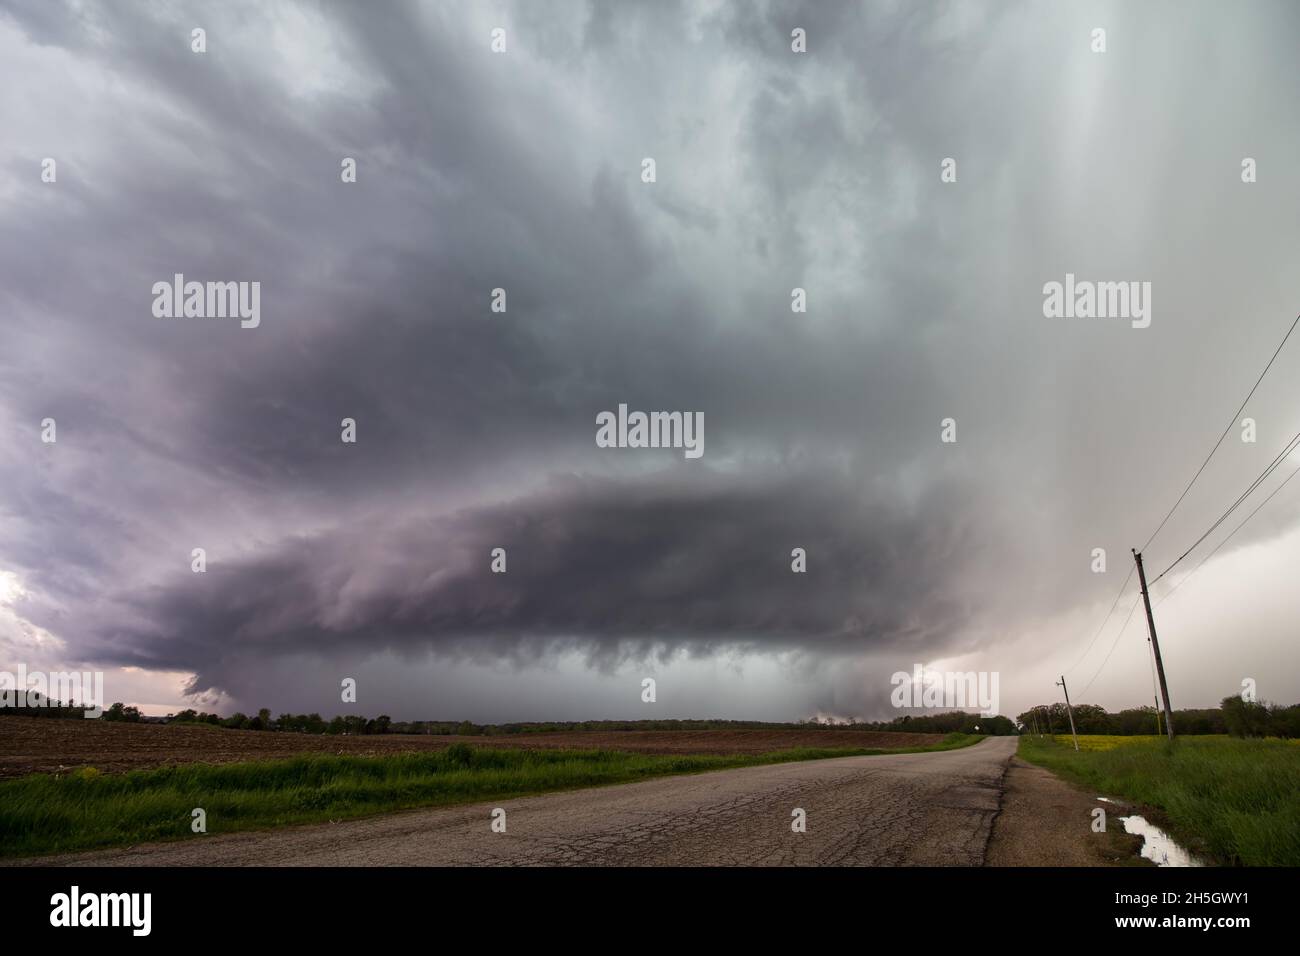 Looking down a road at a supercell storm as it approaches over a farm field. Stock Photo